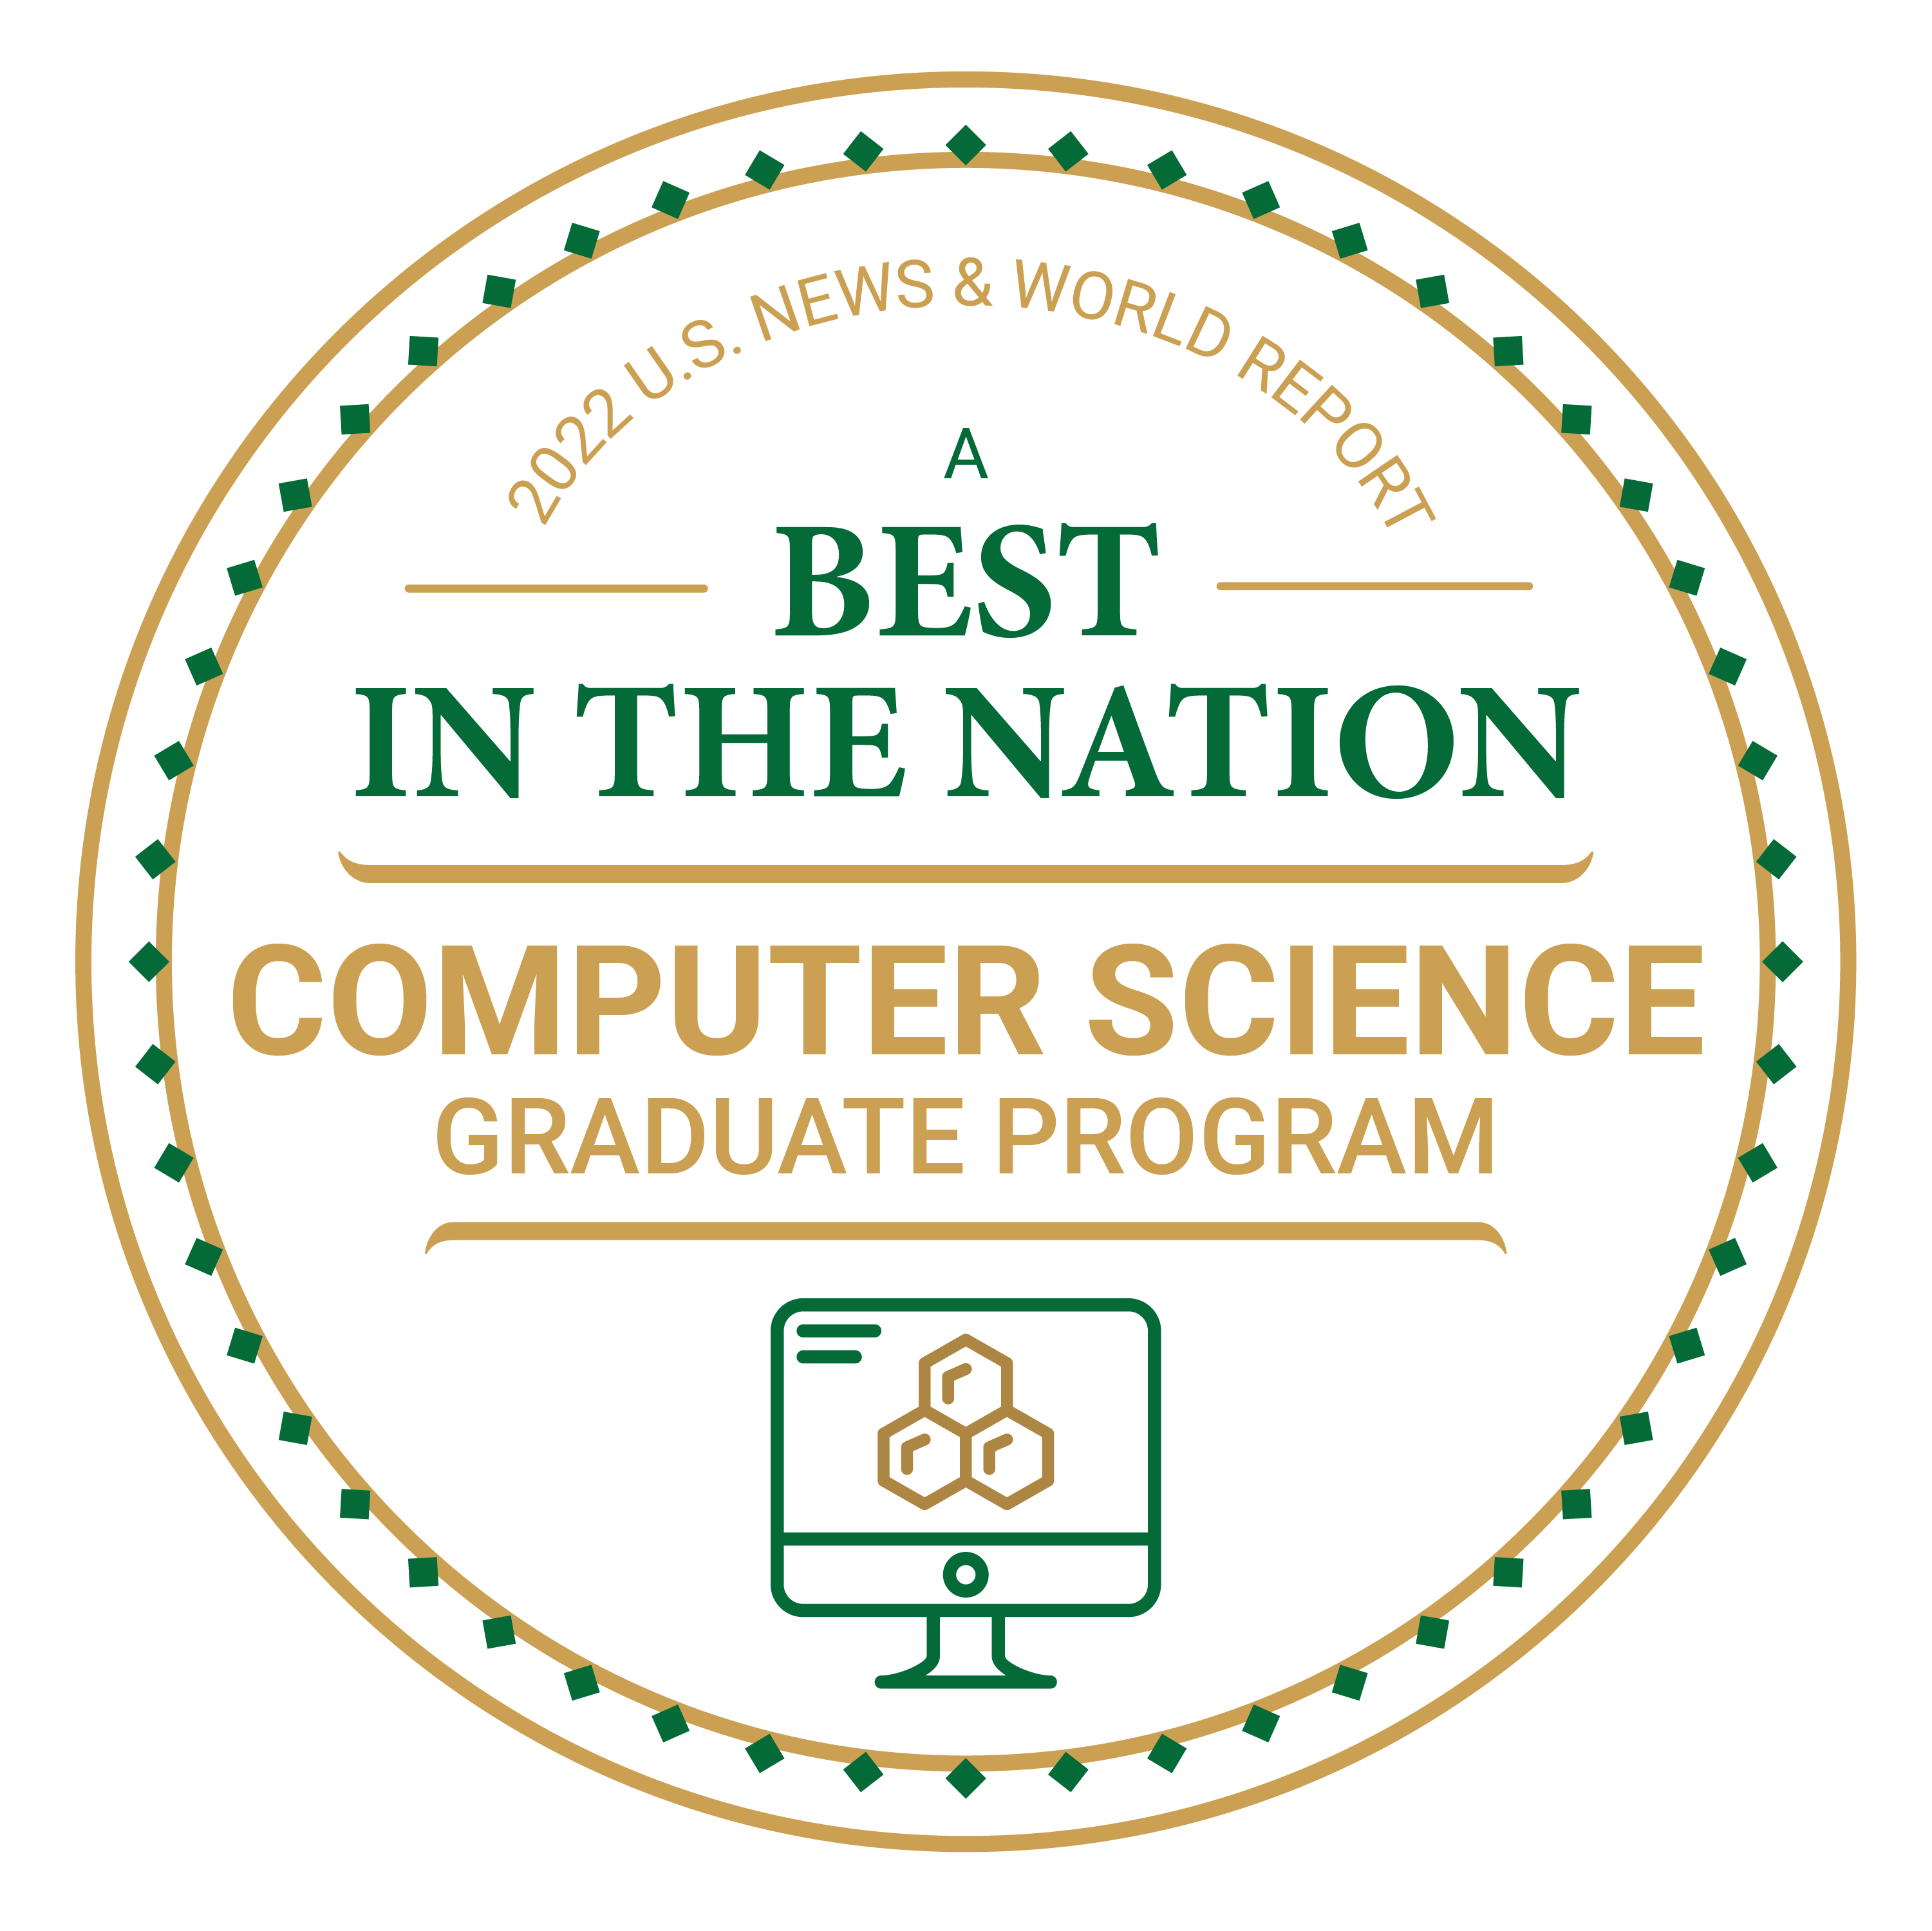 2022 U.S. News & World Report A Best in the Nation Computer Science Graduate Program